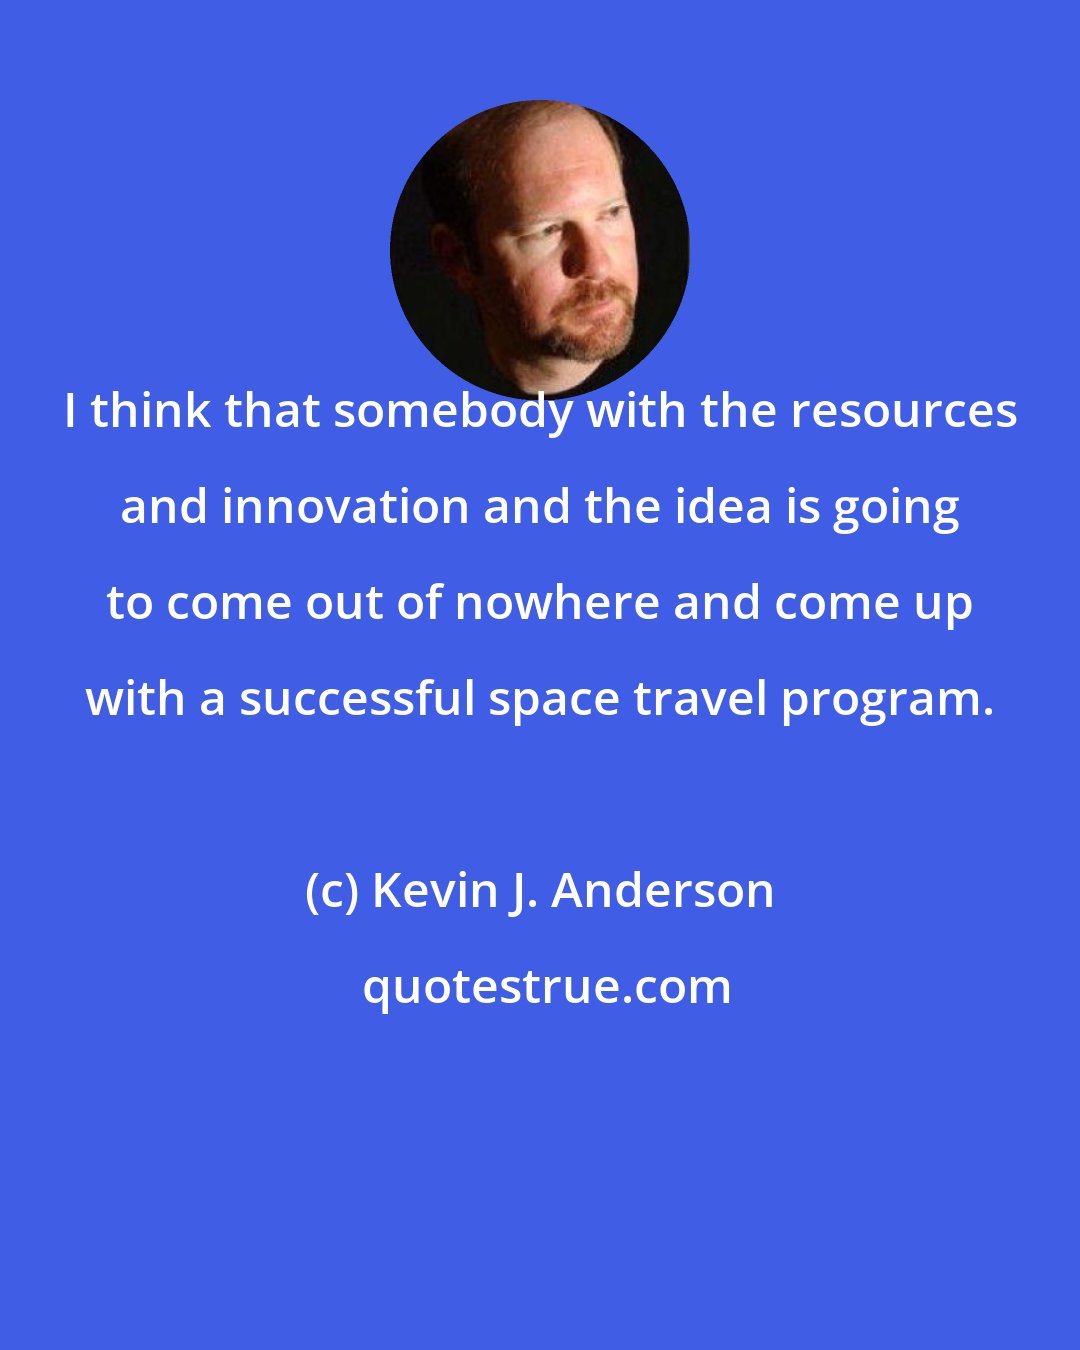 Kevin J. Anderson: I think that somebody with the resources and innovation and the idea is going to come out of nowhere and come up with a successful space travel program.